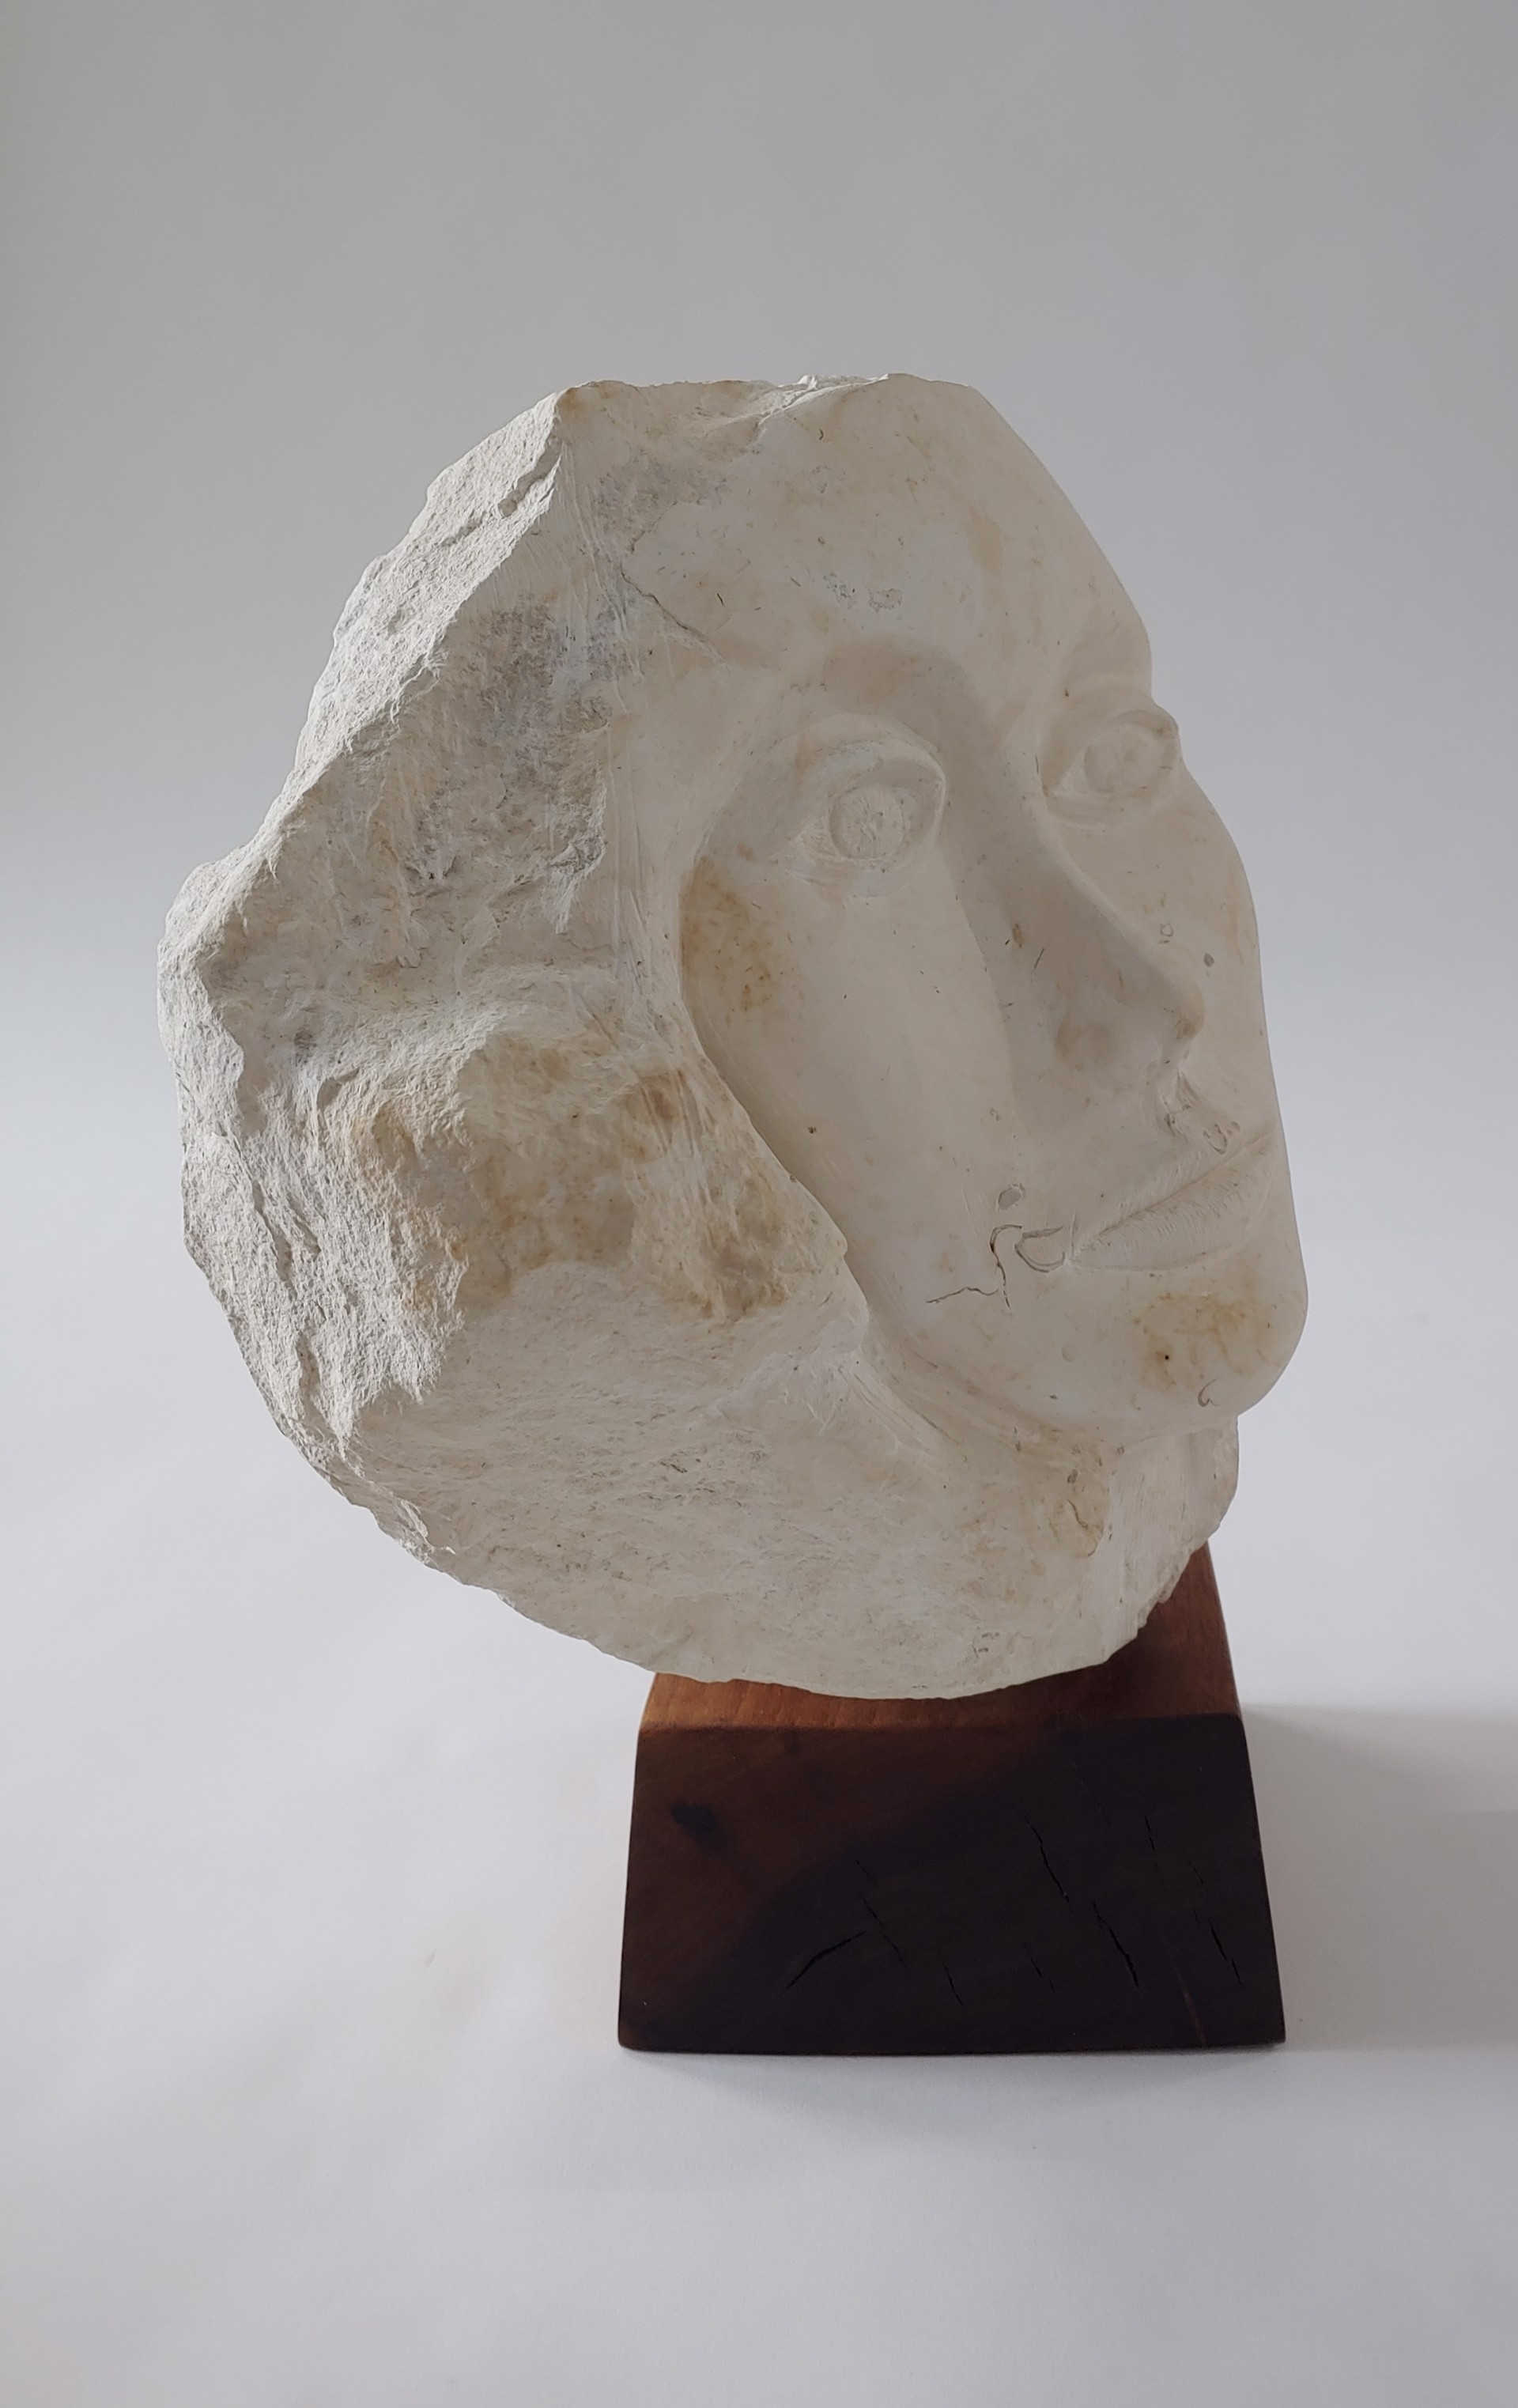 Stone Woman's Face w/ Stand #2 - Stone Sculpture by David Amdur